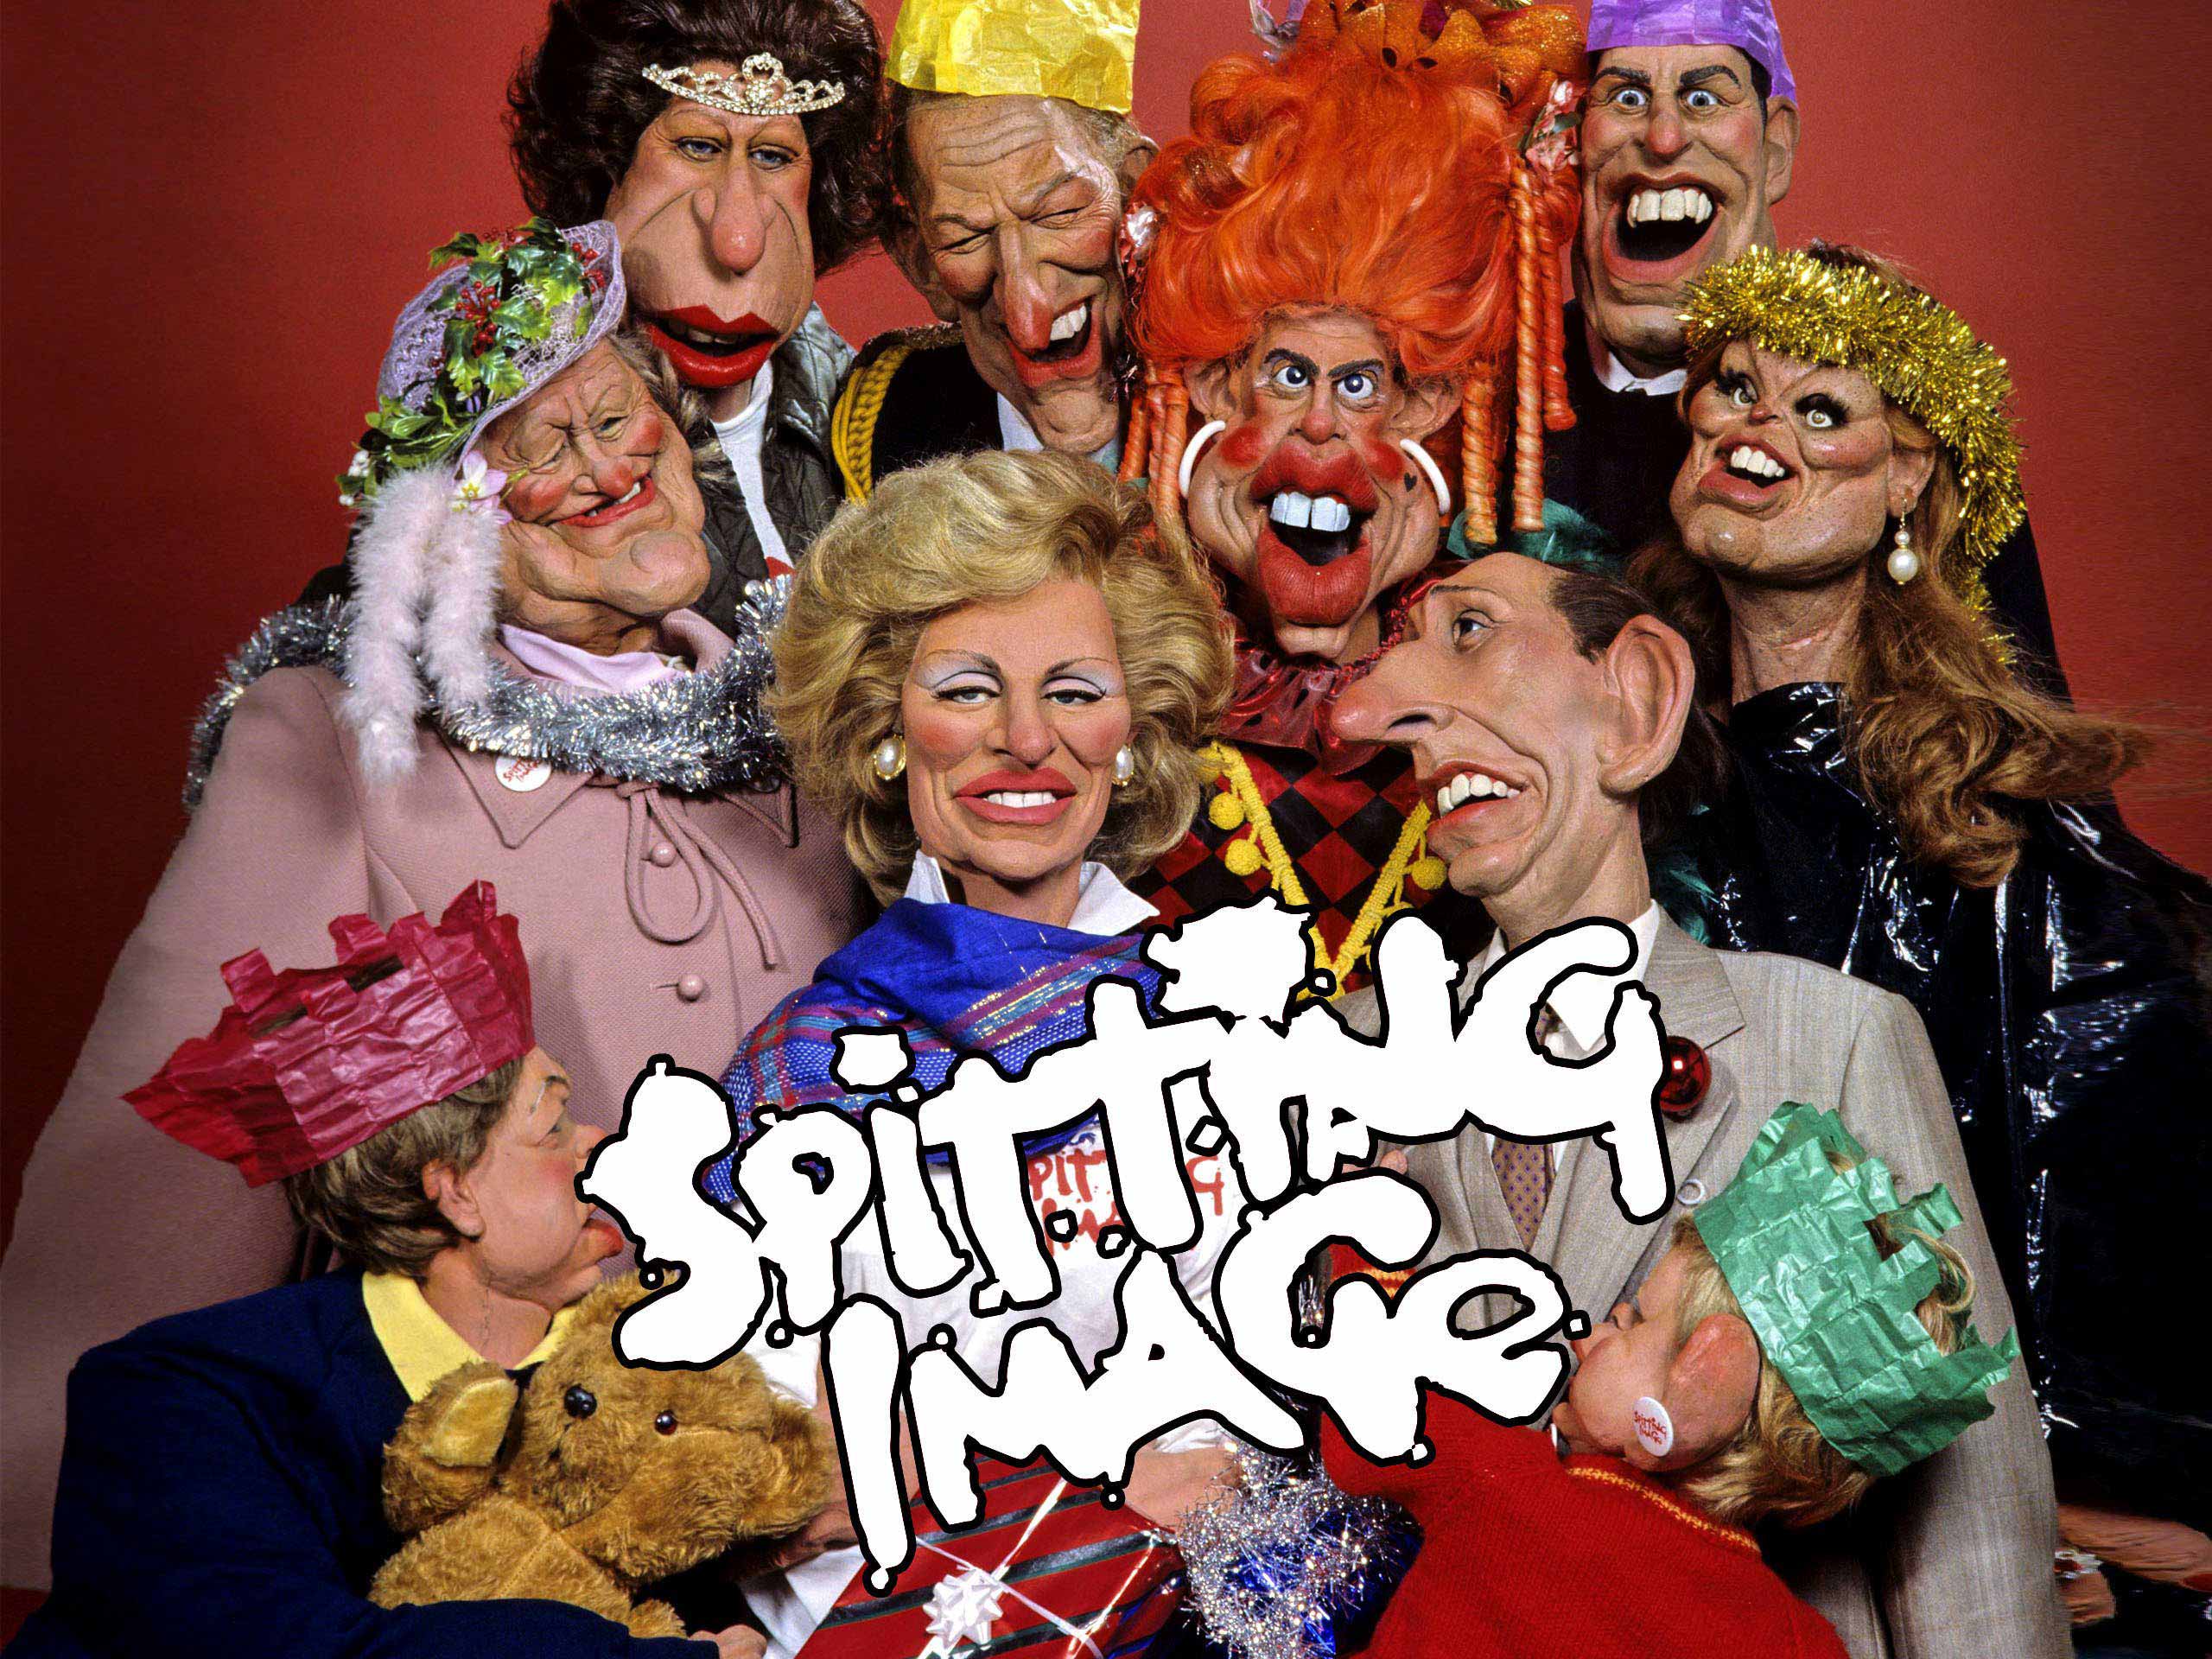 Spitting Image is a satirical TV puppet show, created by Peter Fluck, Roger...